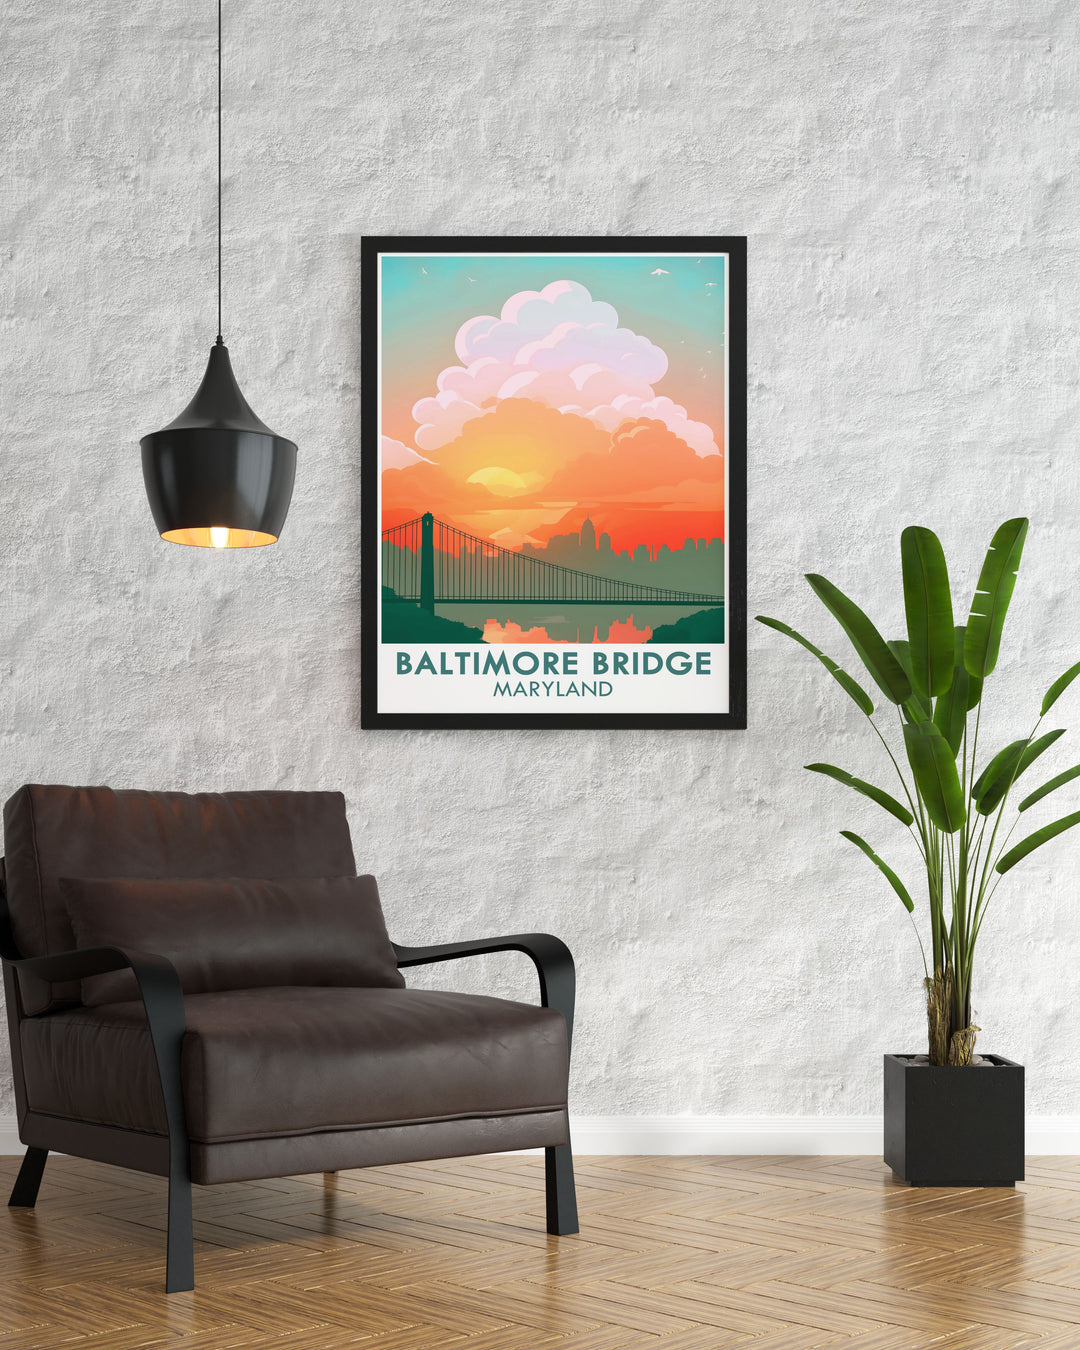 Exquisite Baltimore wall art with the new Key Bridge design. The vibrant colors and intricate details make this a standout piece for any room. Perfect for Maryland artwork enthusiasts and housewarming gifts.